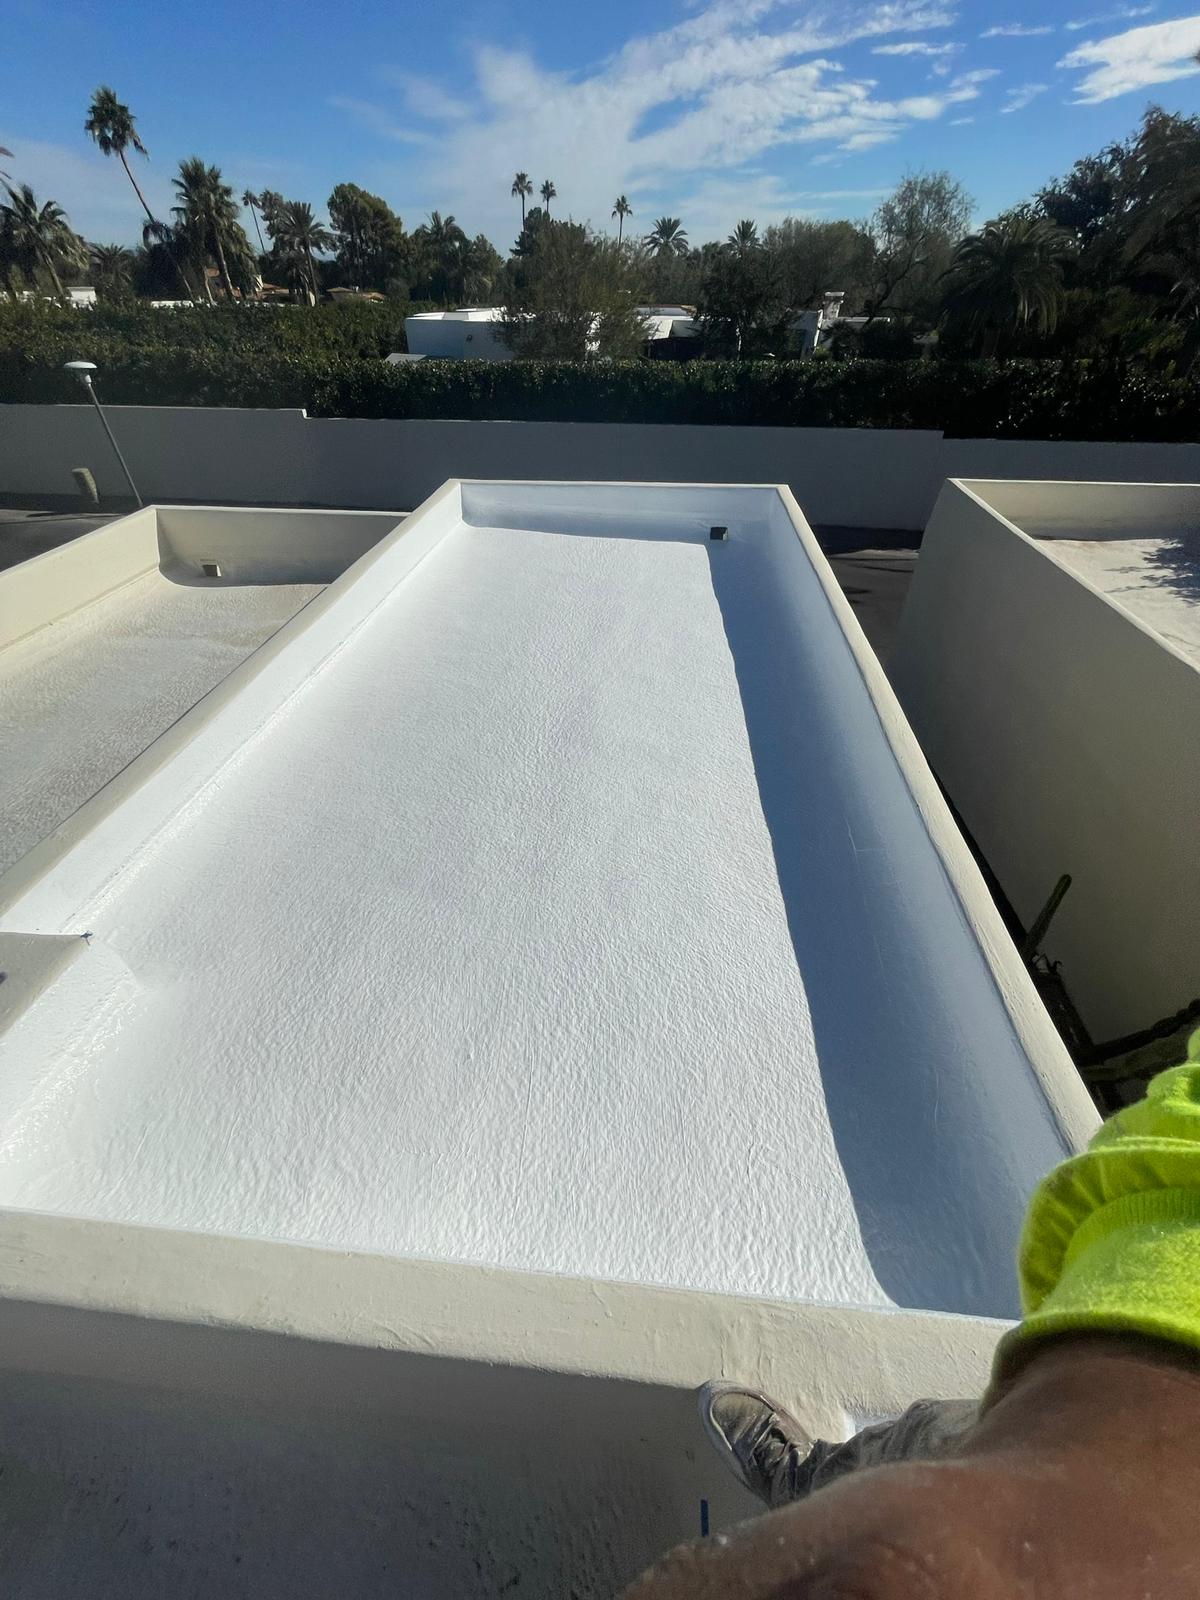 Freshly installed white spray foam coating on a flat roof, enhancing a Mesa home's energy conservation.